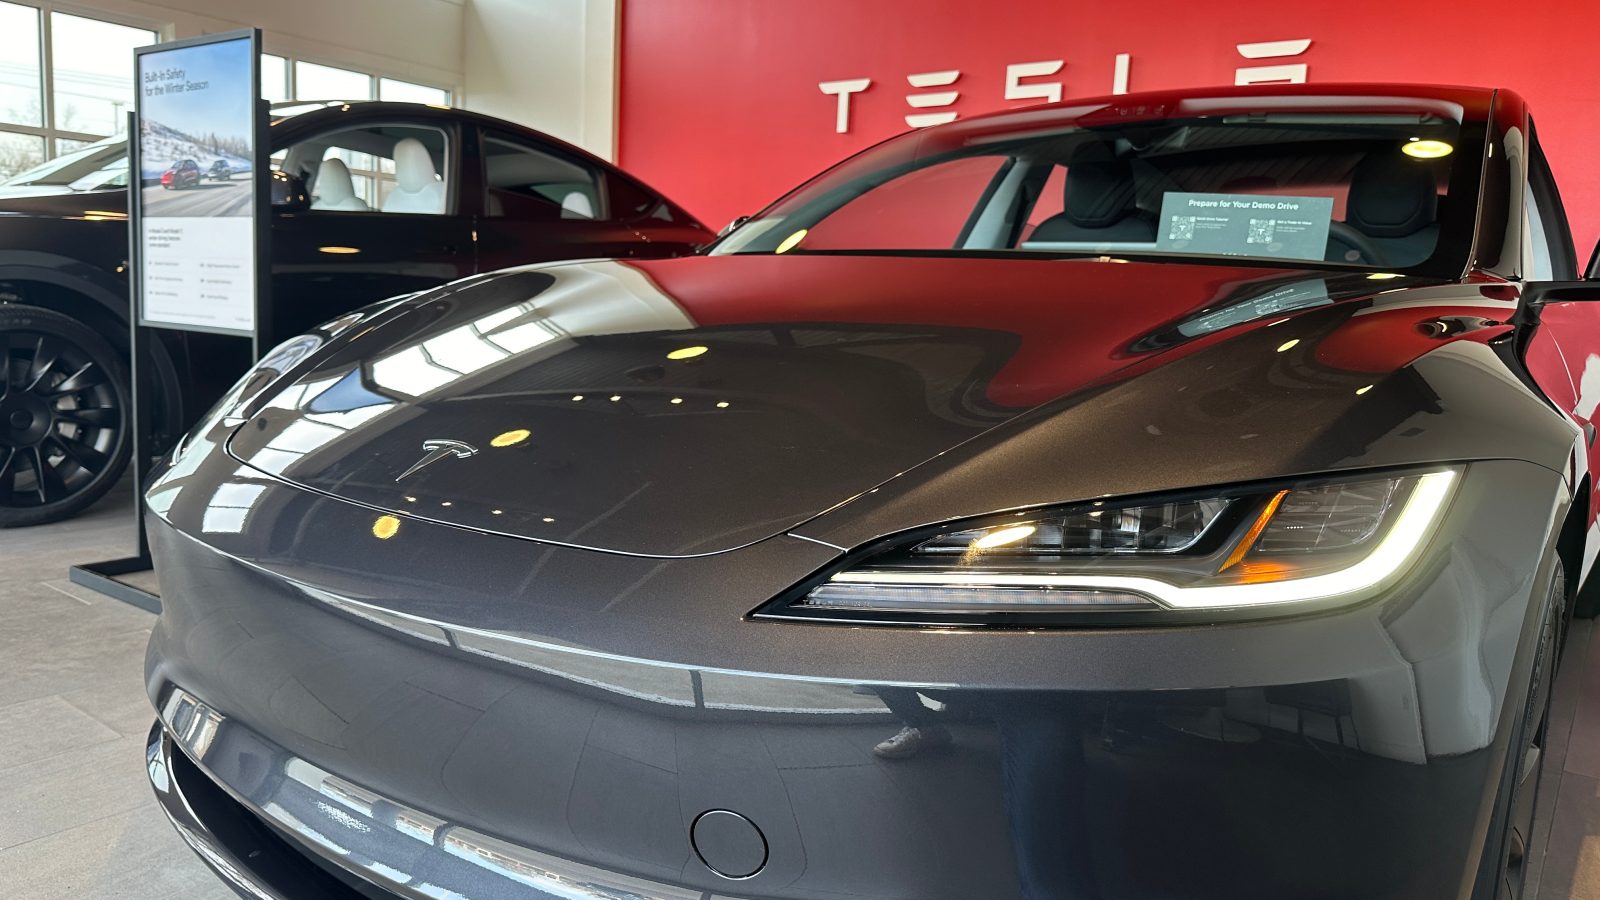 Here’s why the Tesla Model 3’s lease deal is way better than the FIAT 500e’s Auto Recent